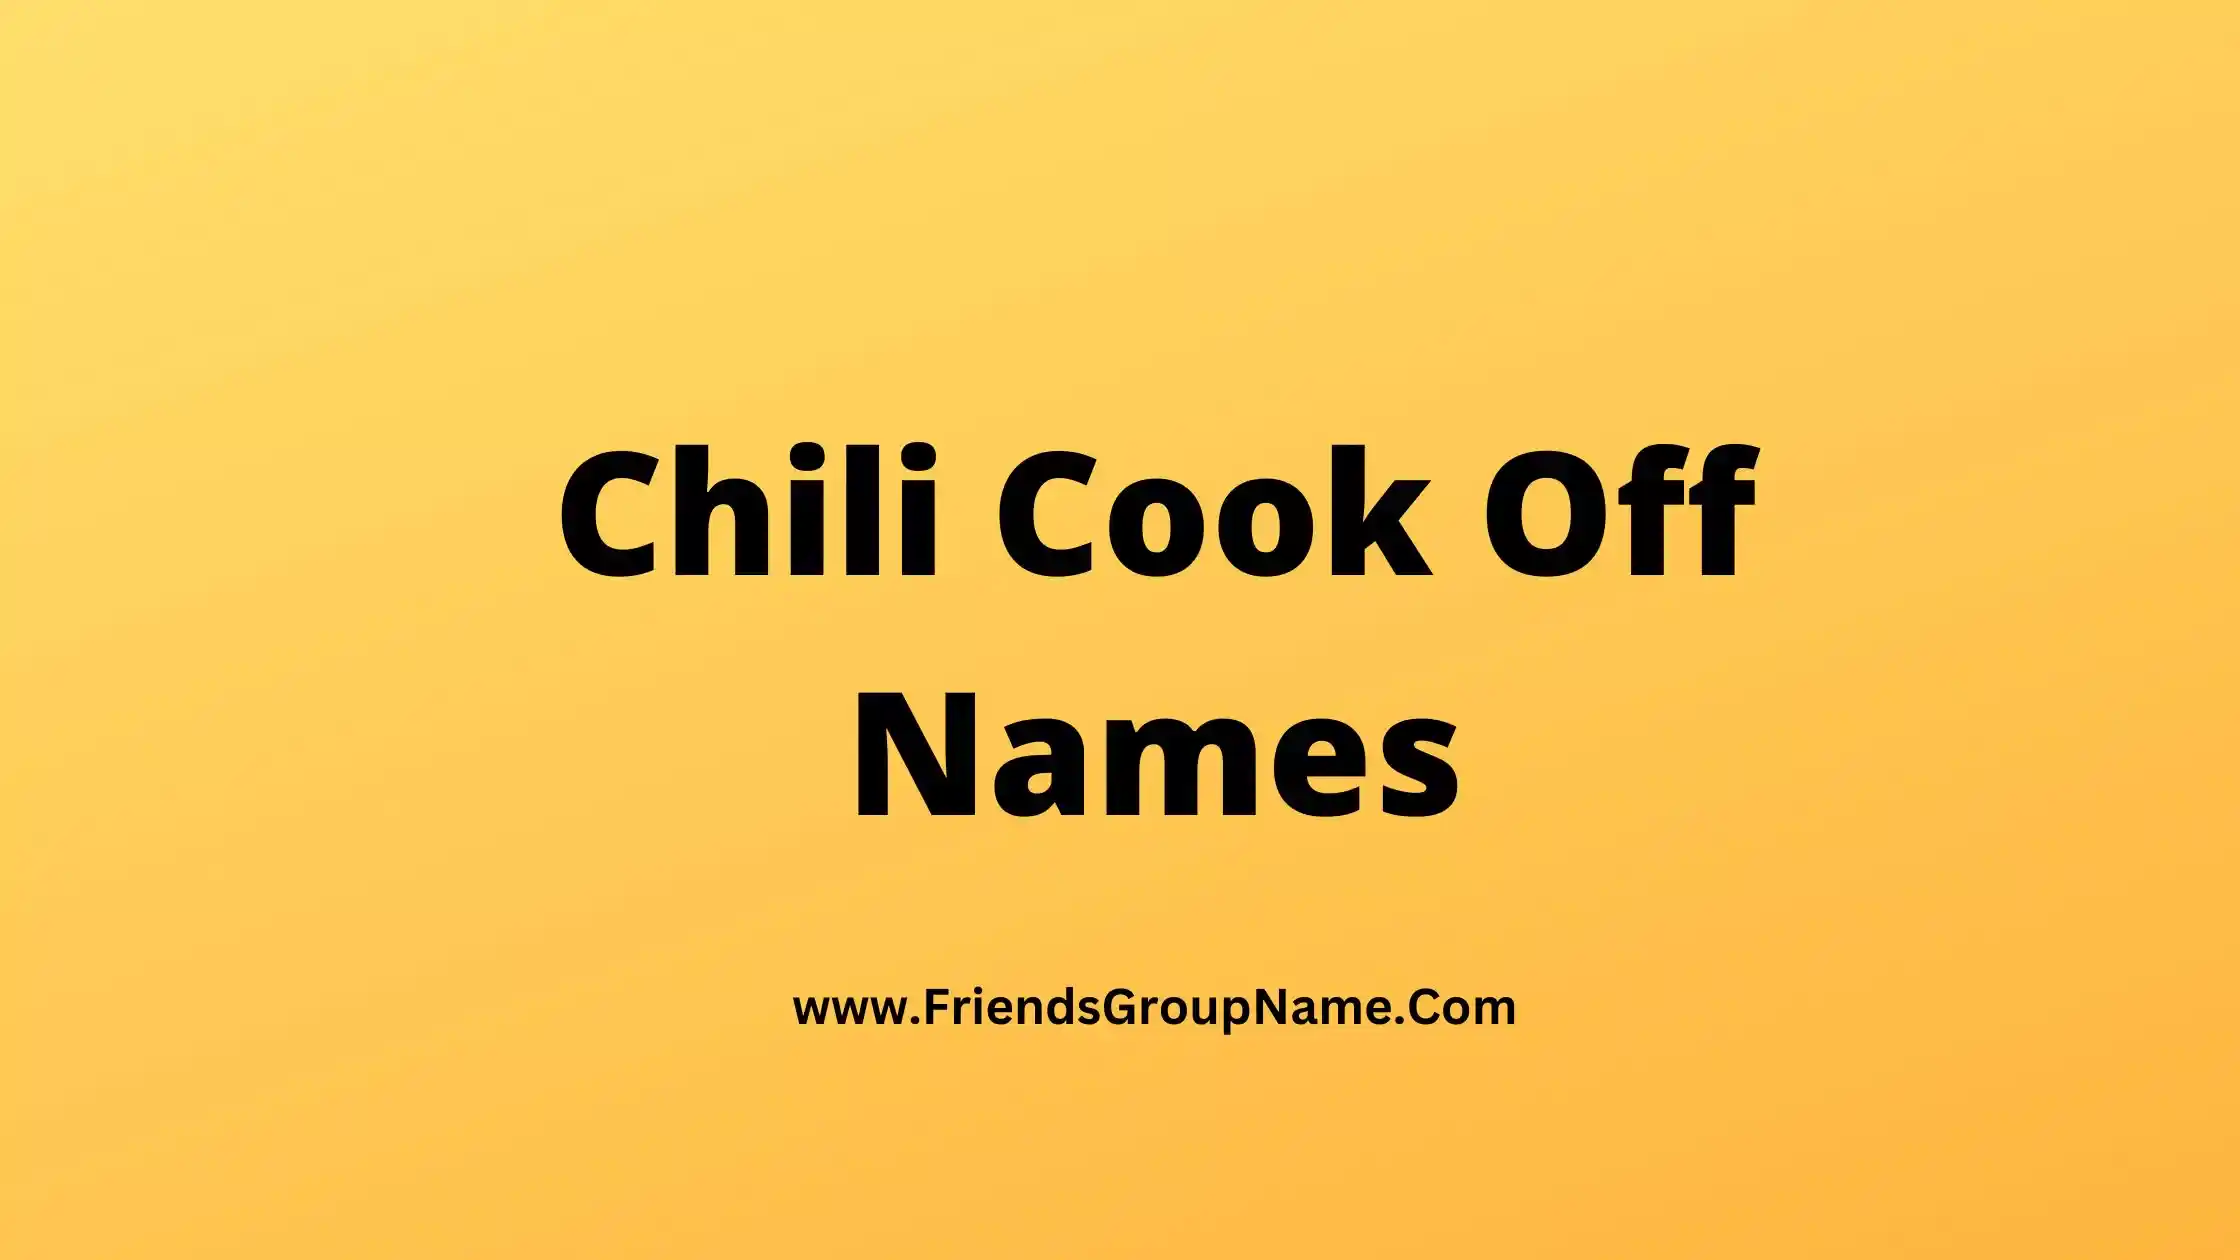 Chili Cook Off Names